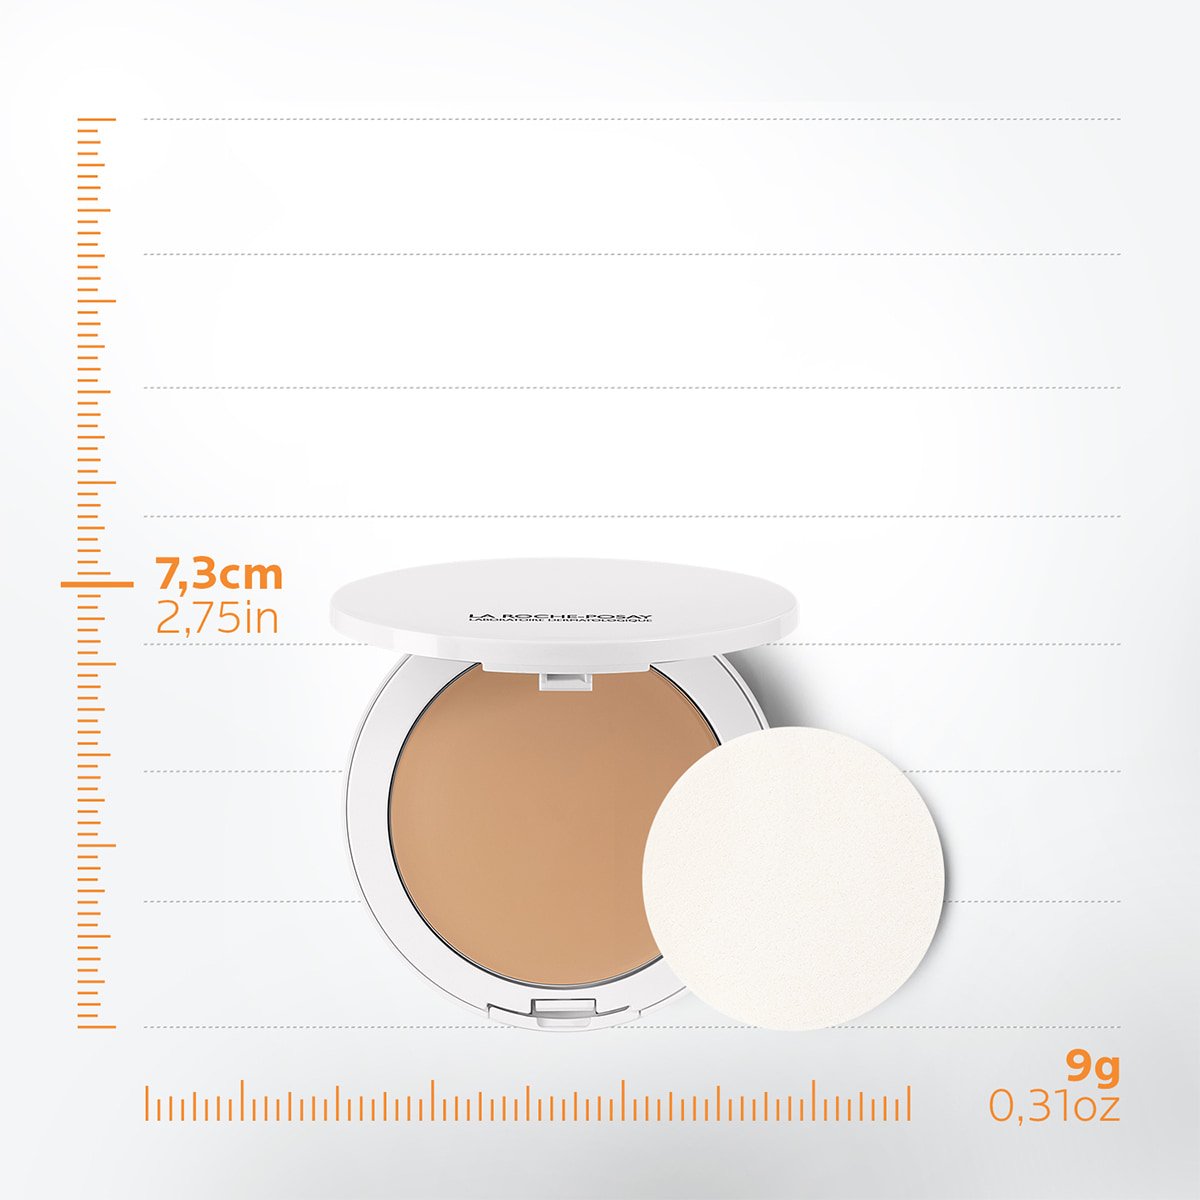 La Roche Posay ProductPage Sun Anthelios XL Compact Cream Unifying Spf